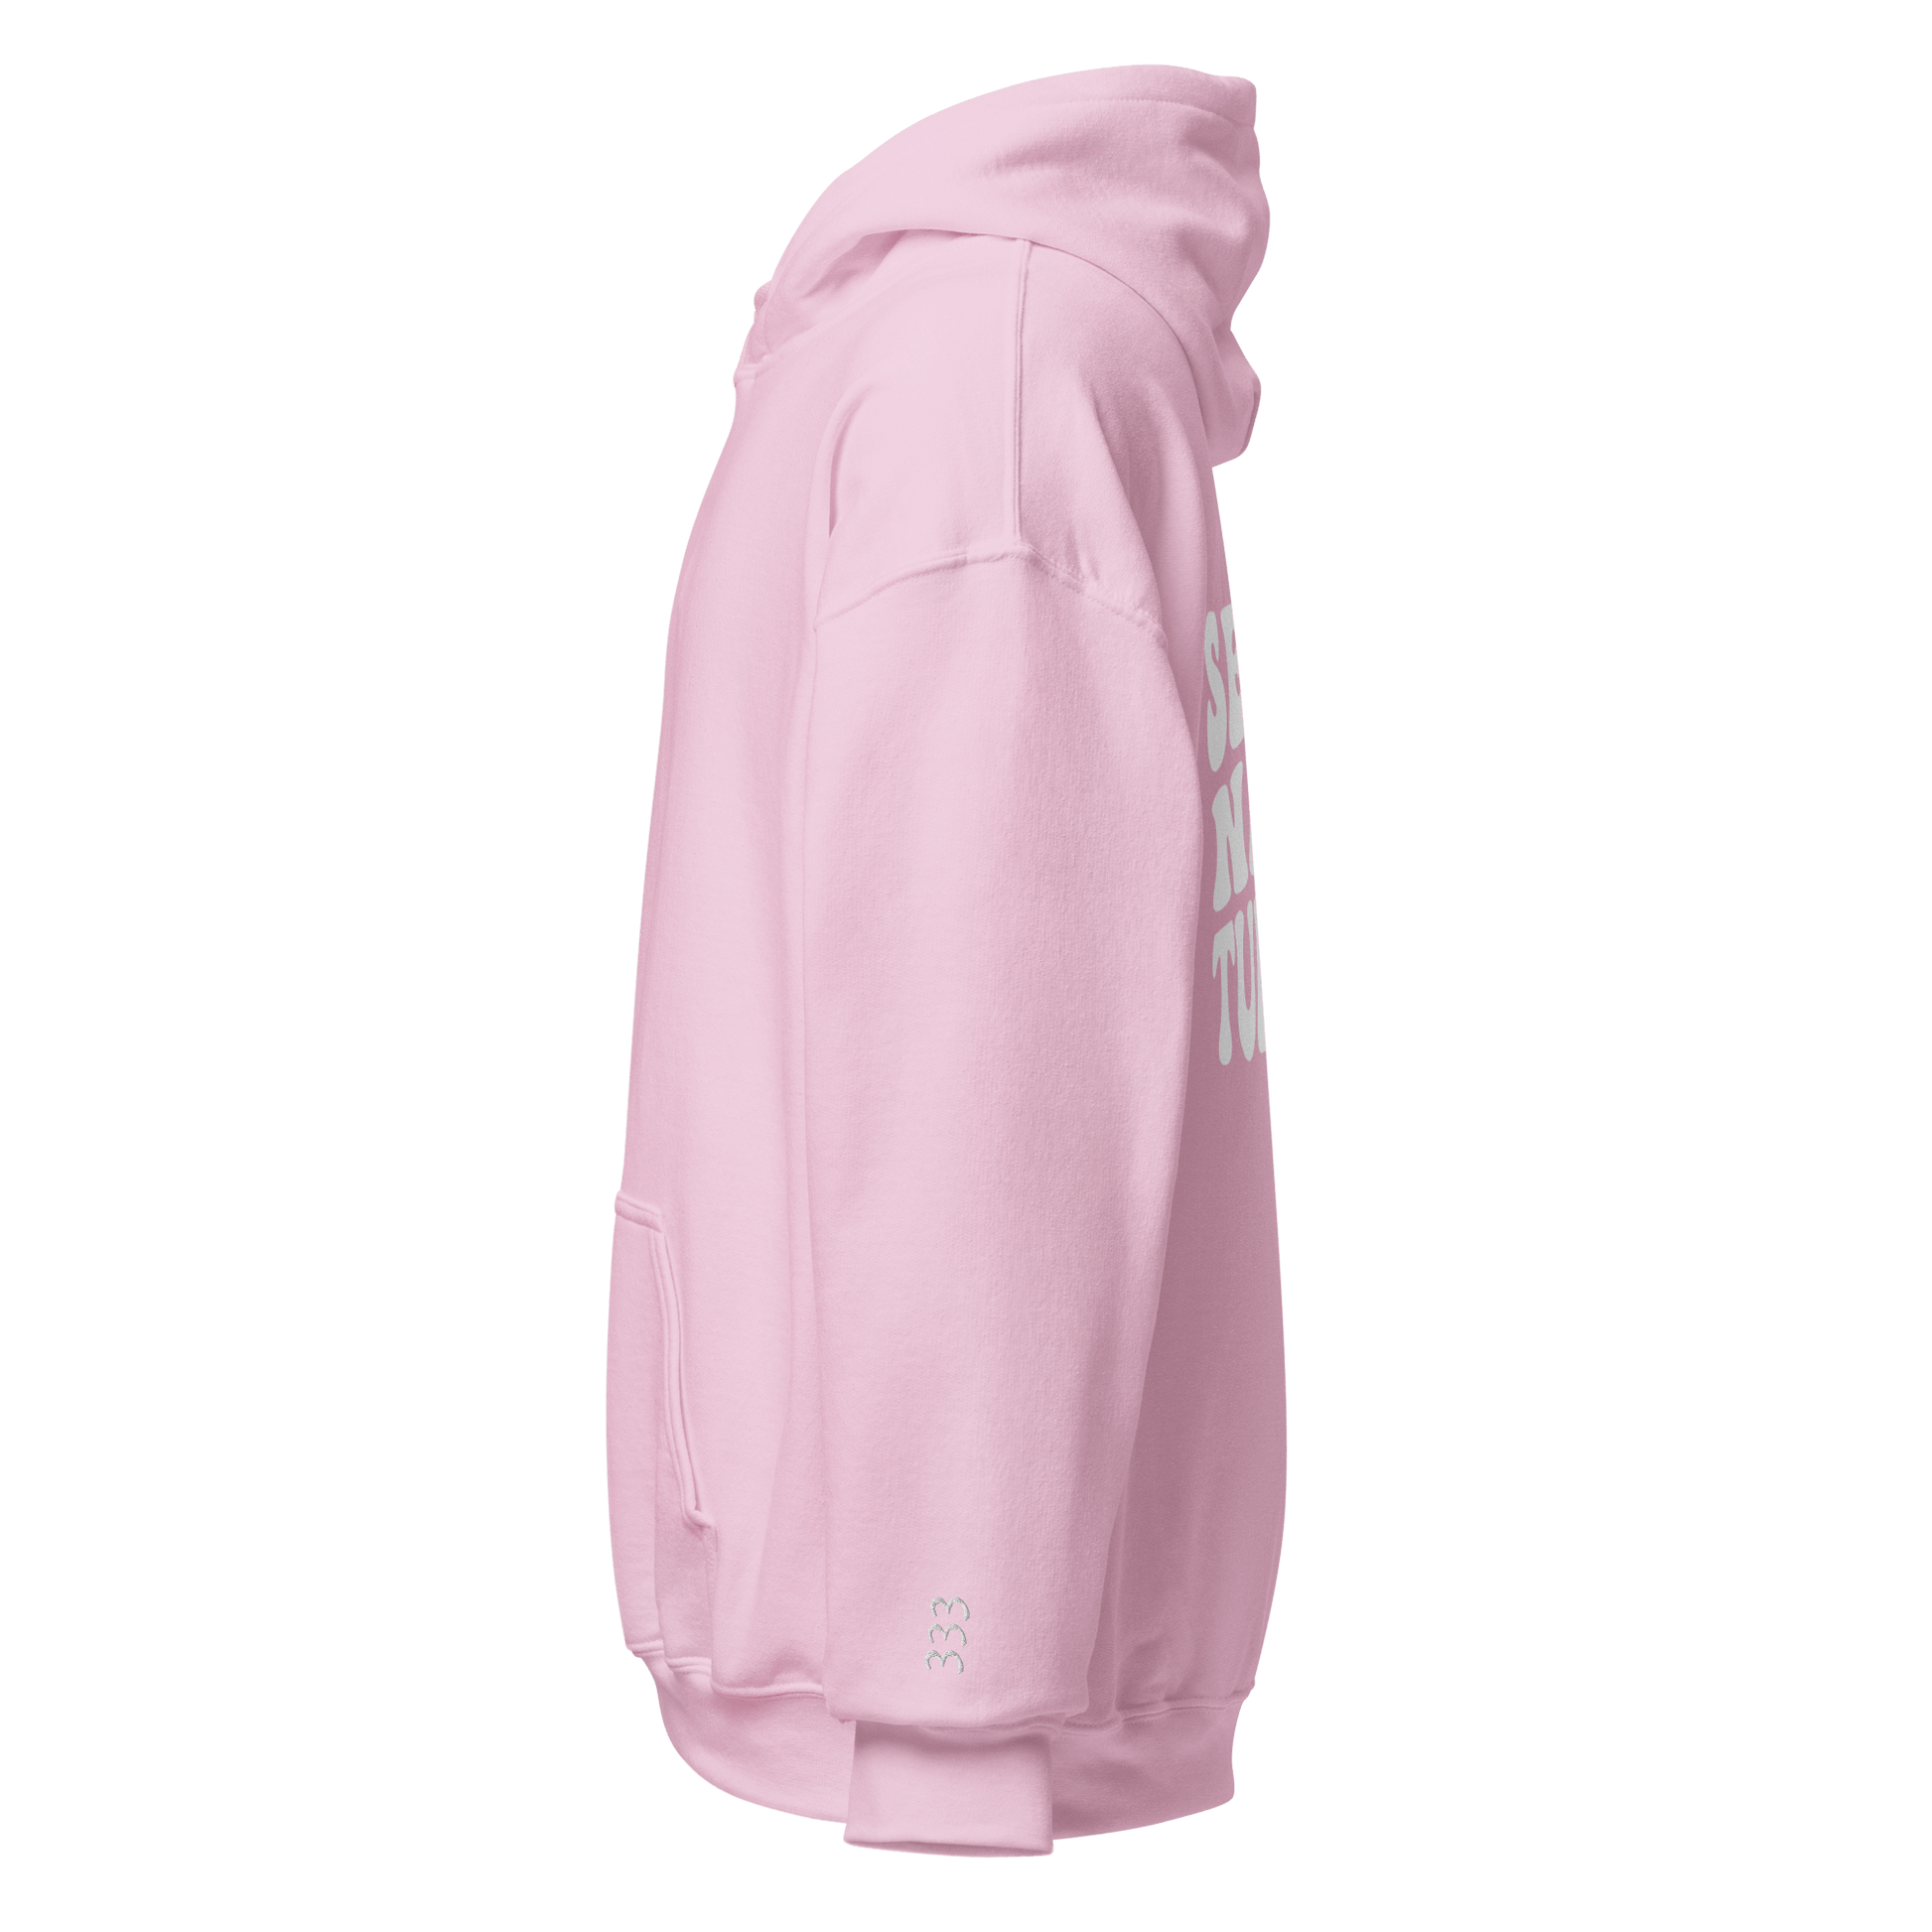 See You Next Tuesday Pink Hoodie - James Kennedy Merch